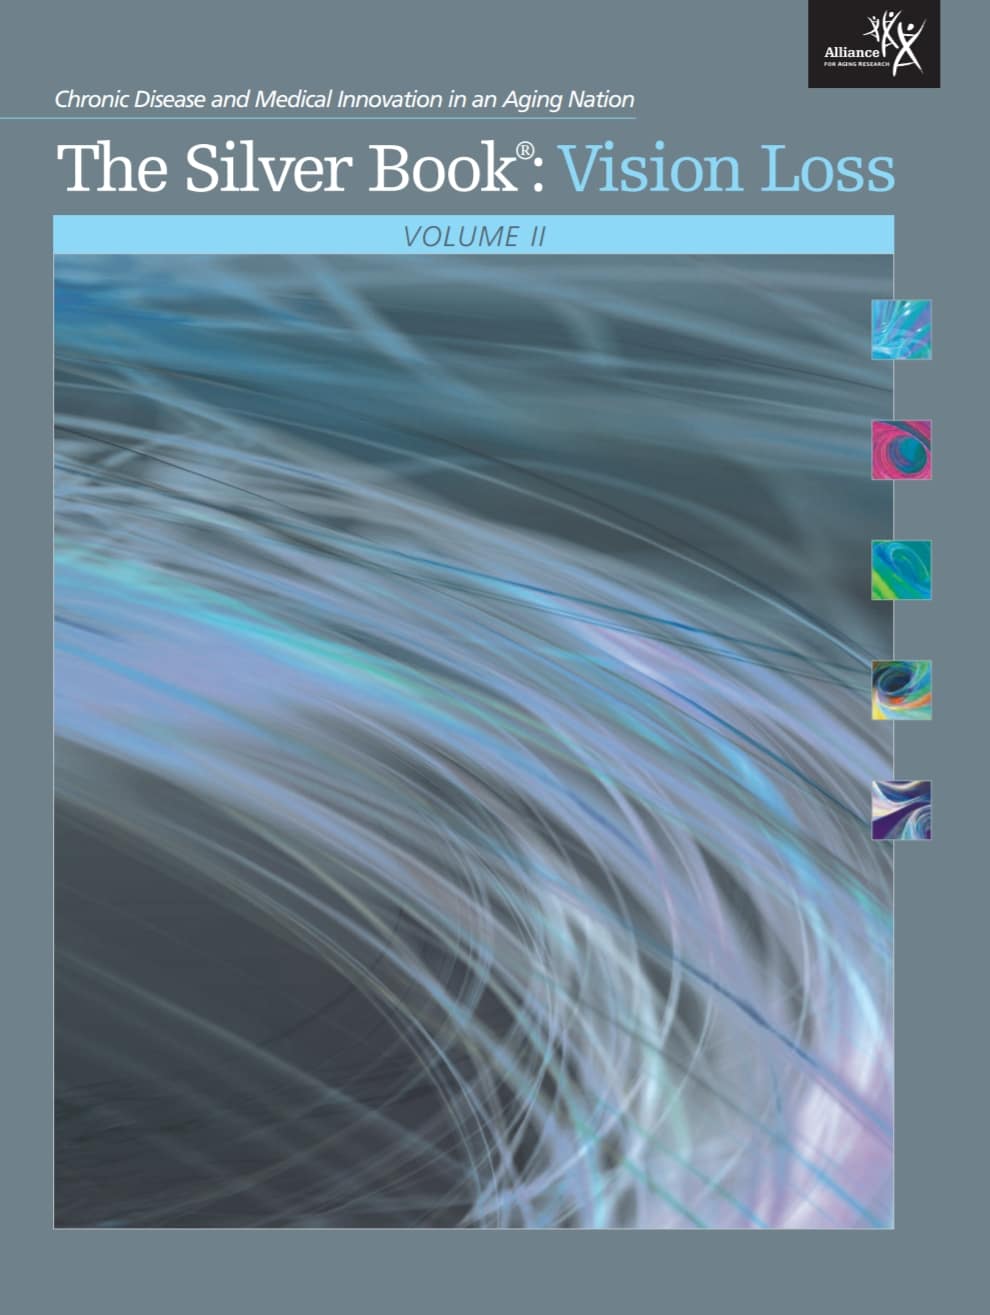 "The Silver Book: Vision Loss" cover.